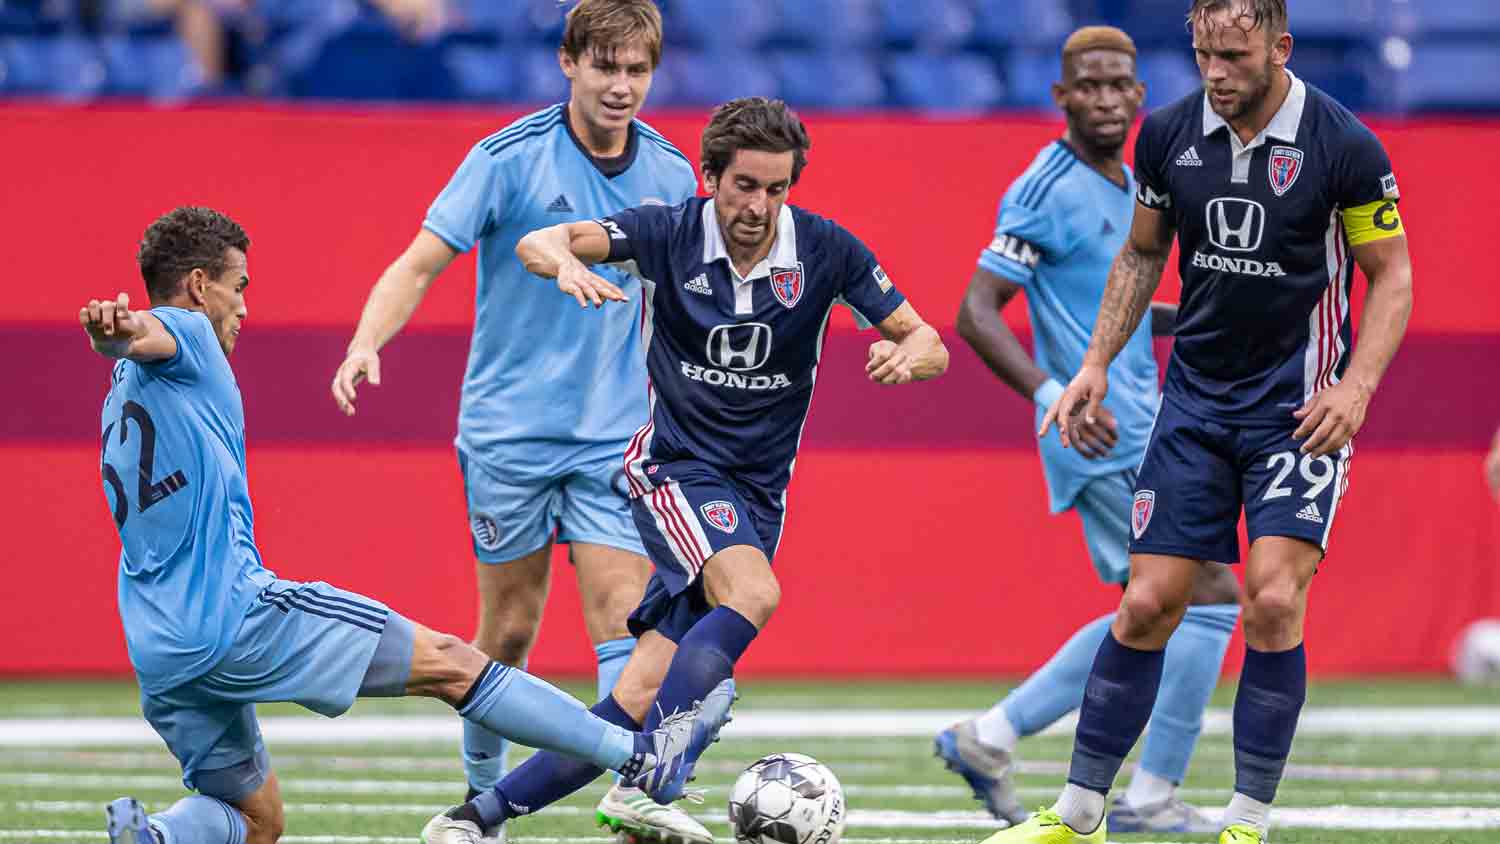 Hartford Athletic can't convert on opportunities in loss to Indy Eleven -  The Collinsville Press